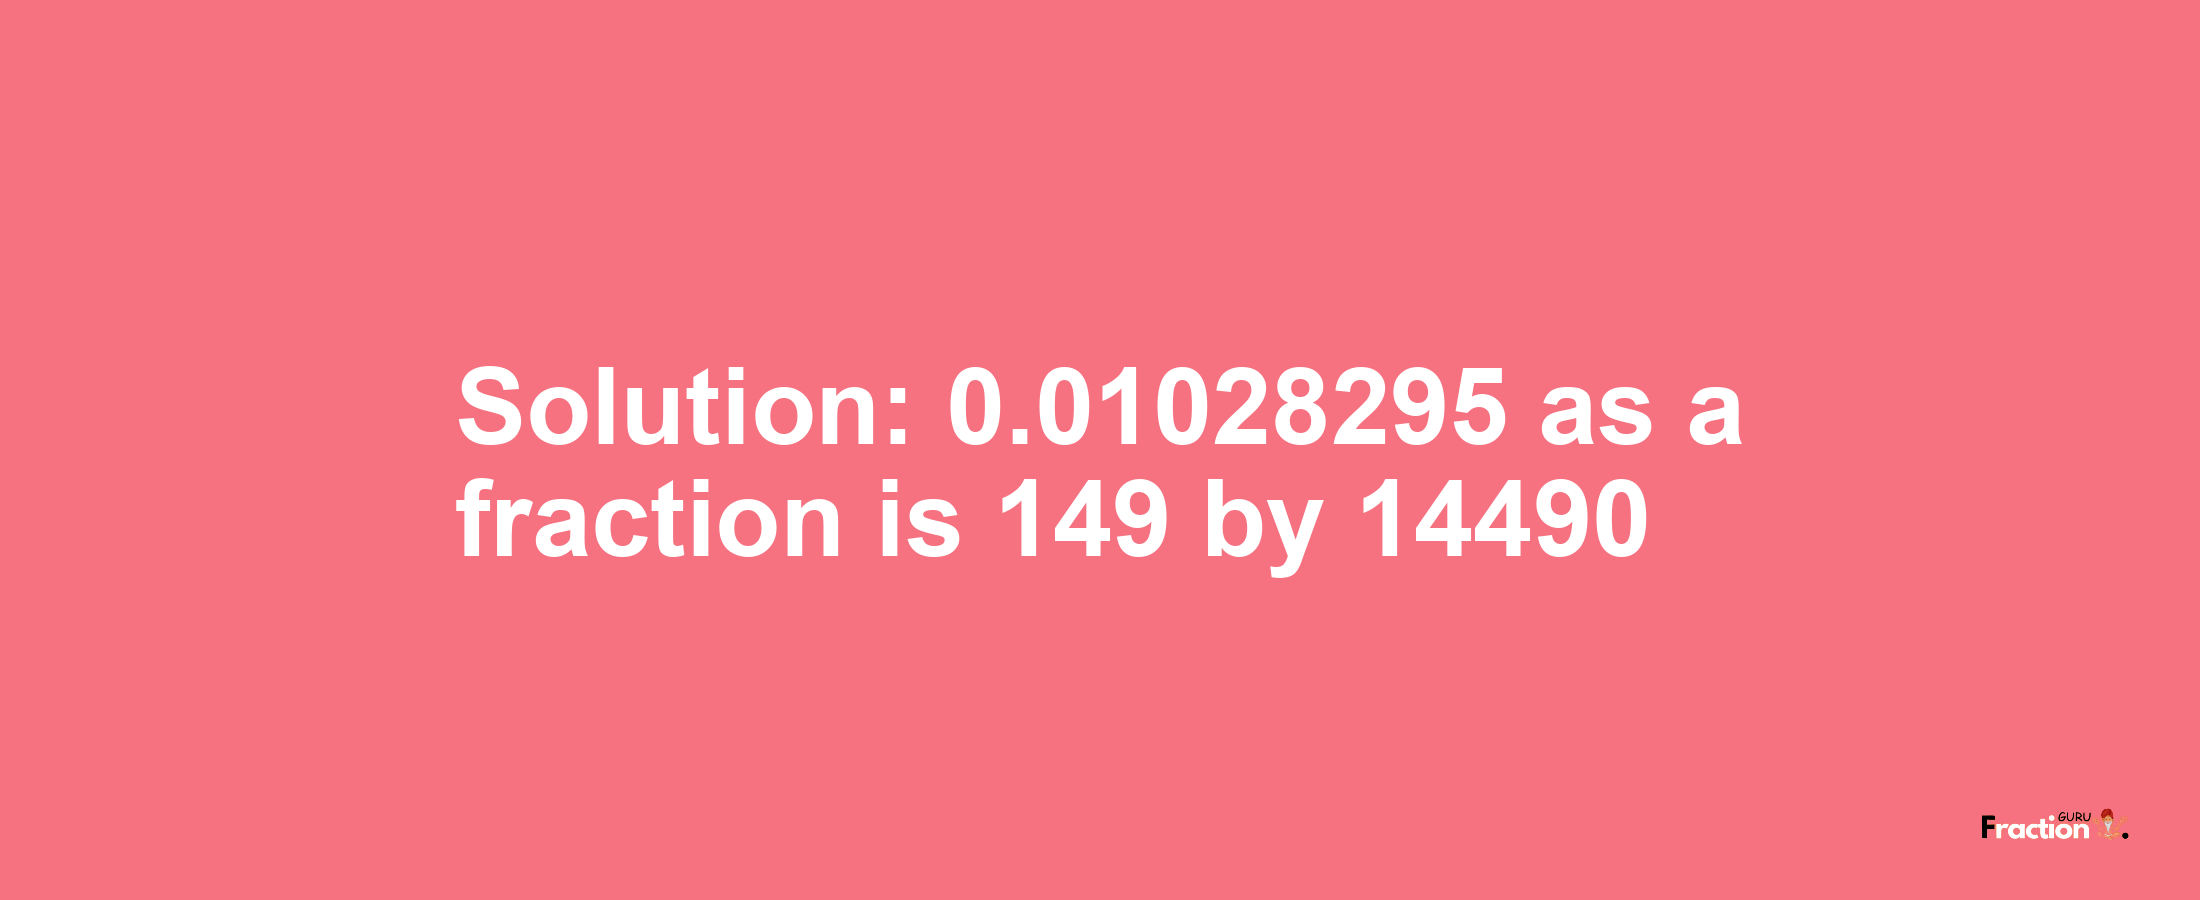 Solution:0.01028295 as a fraction is 149/14490